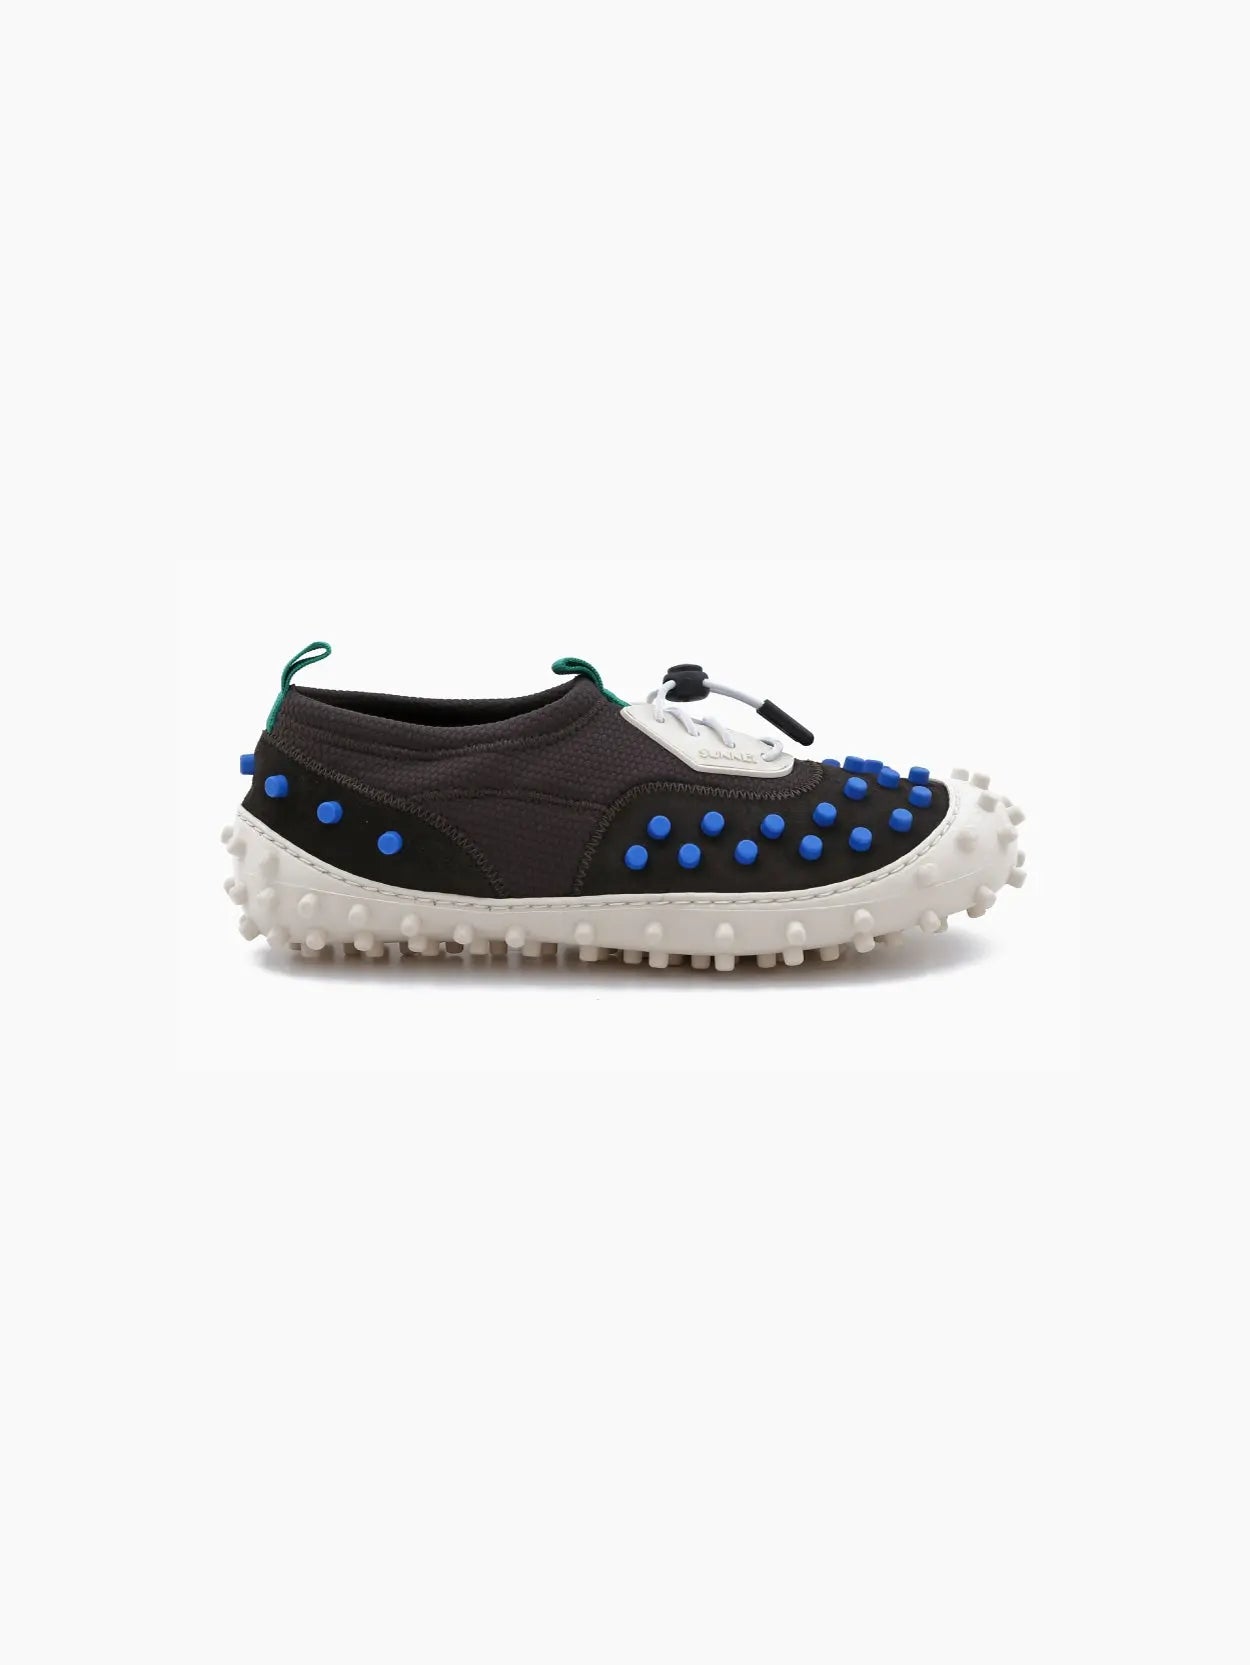 Side view of a unique sneaker from bassalstore featuring a black upper with blue and white patches, and green accents near the heel. The shoe has a white rubber sole adorned with large protruding nubs, creating a textured, rugged appearance. Perfect for your next visit to Barcelona. This is the Sunnei 1000 Chiodi TRK.